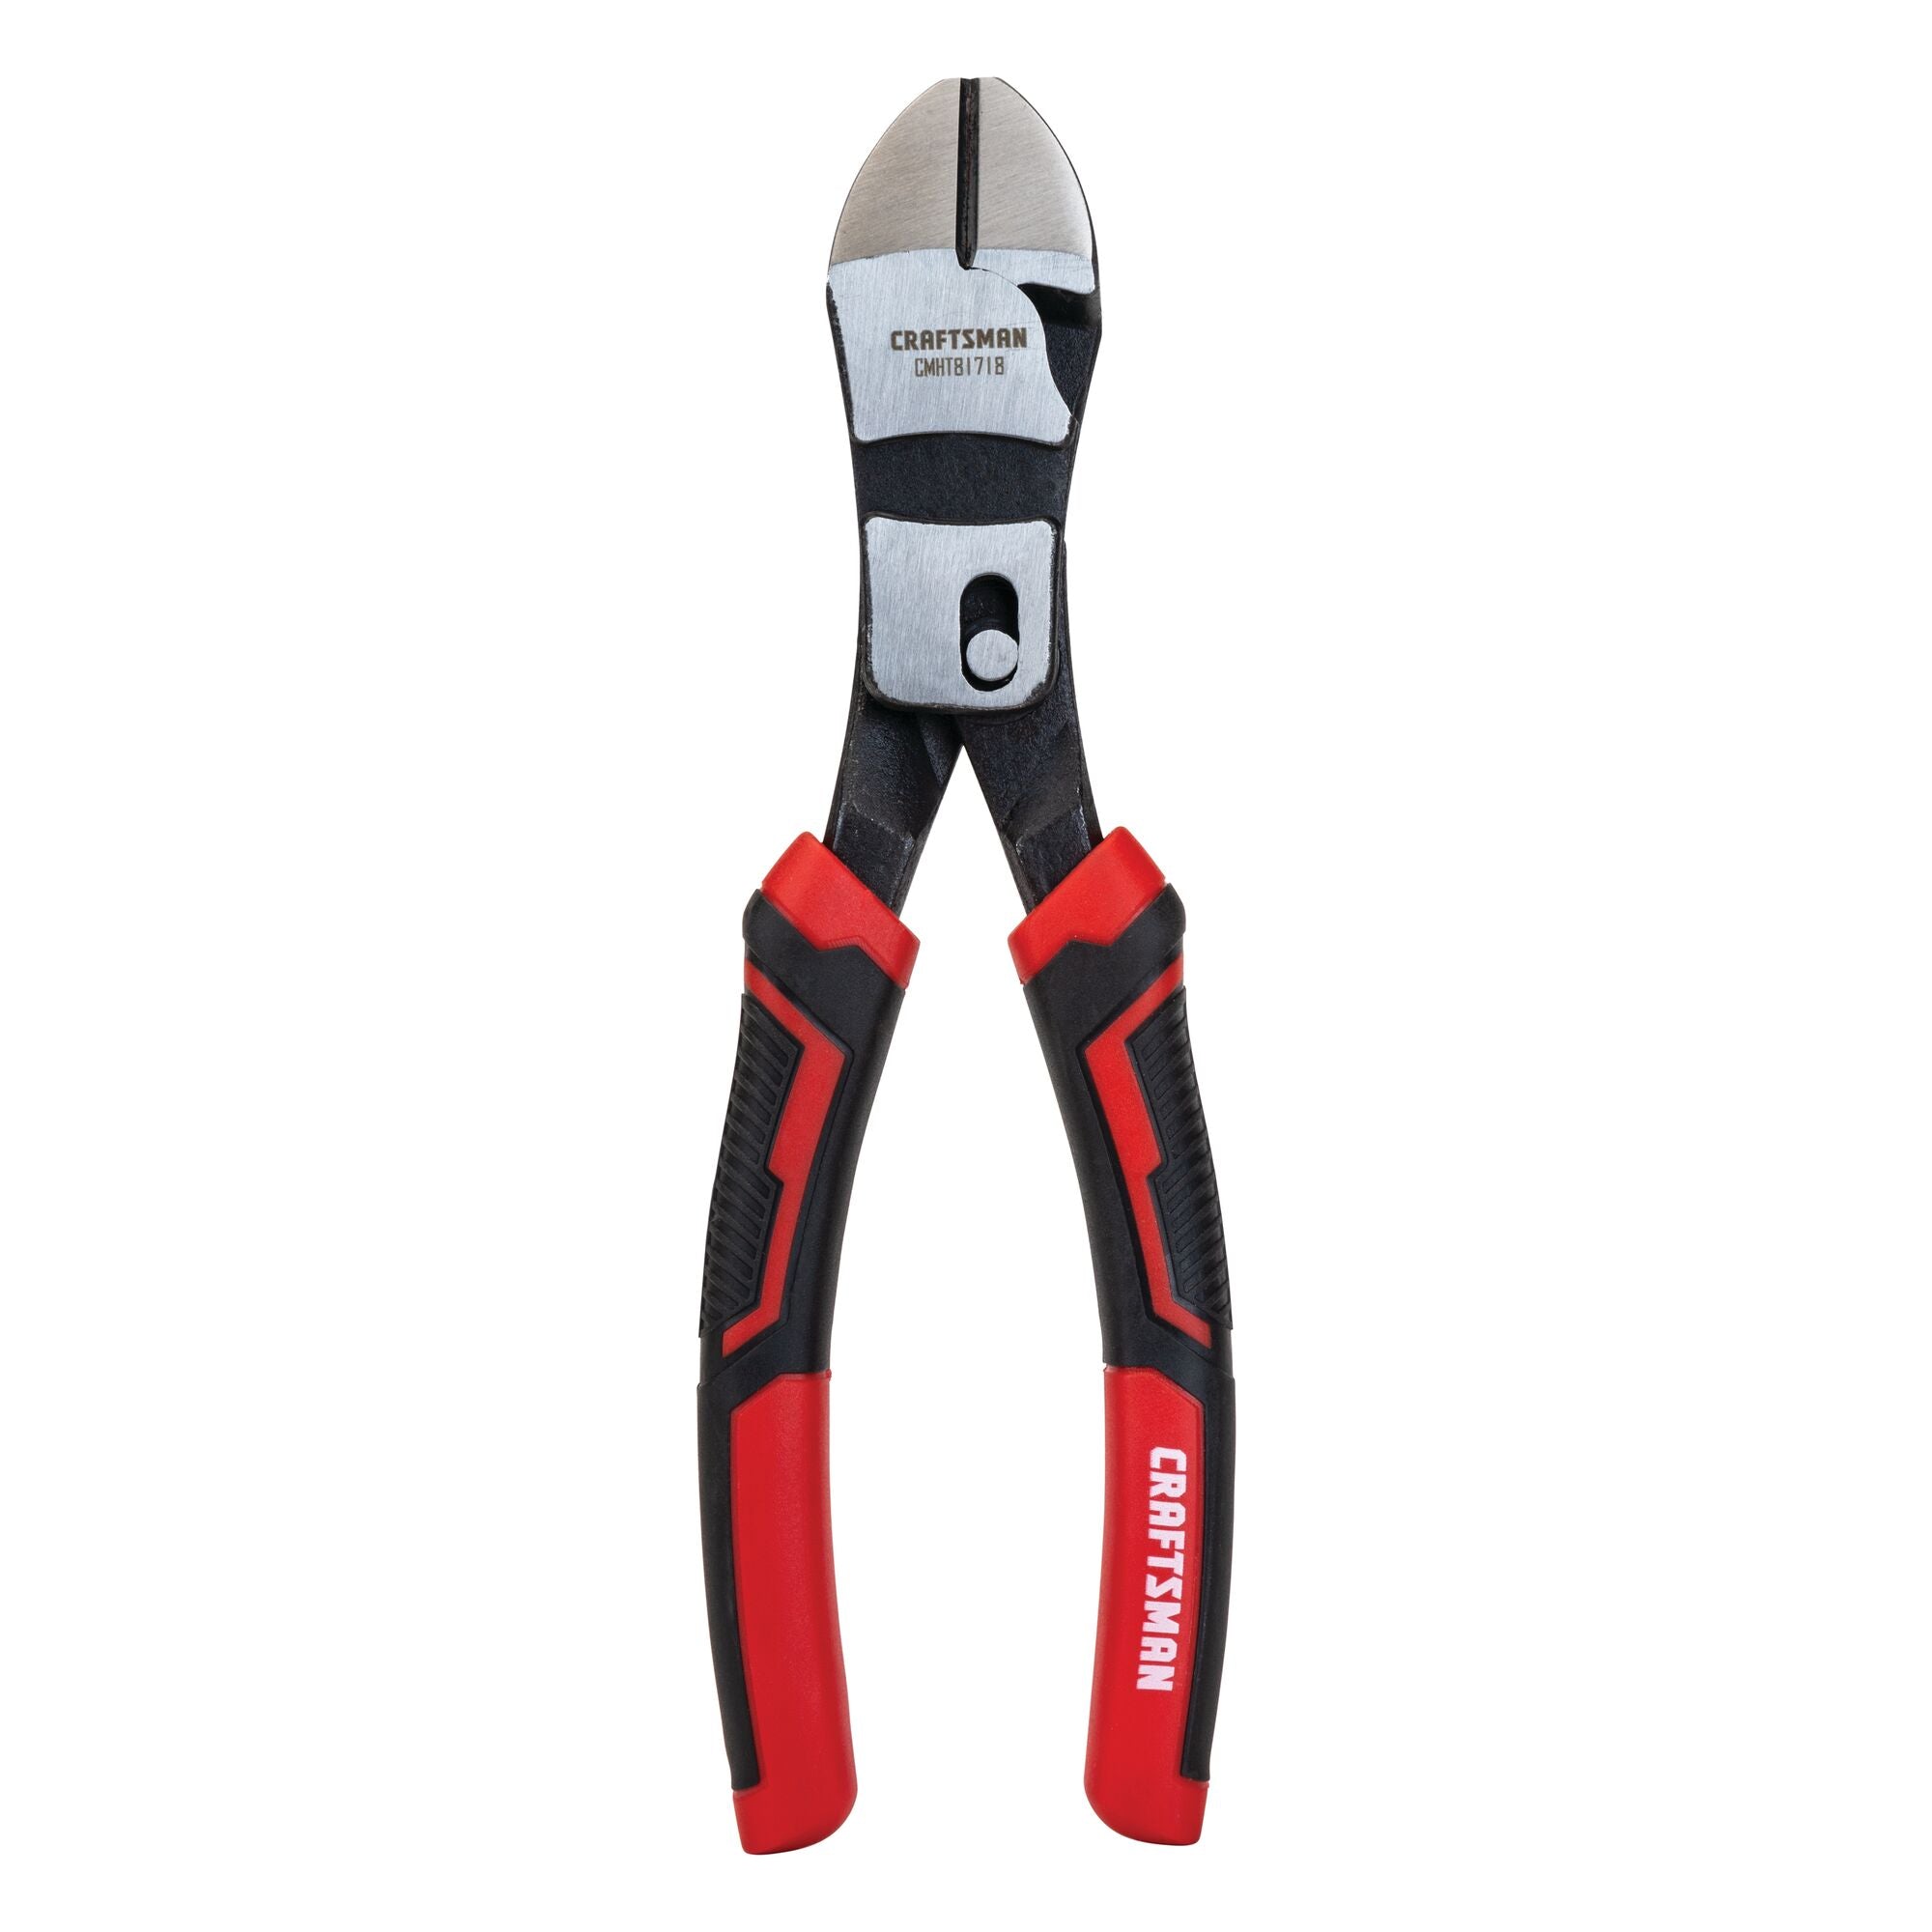 8-in Compound Action Diagonal Pliers | CRAFTSMAN